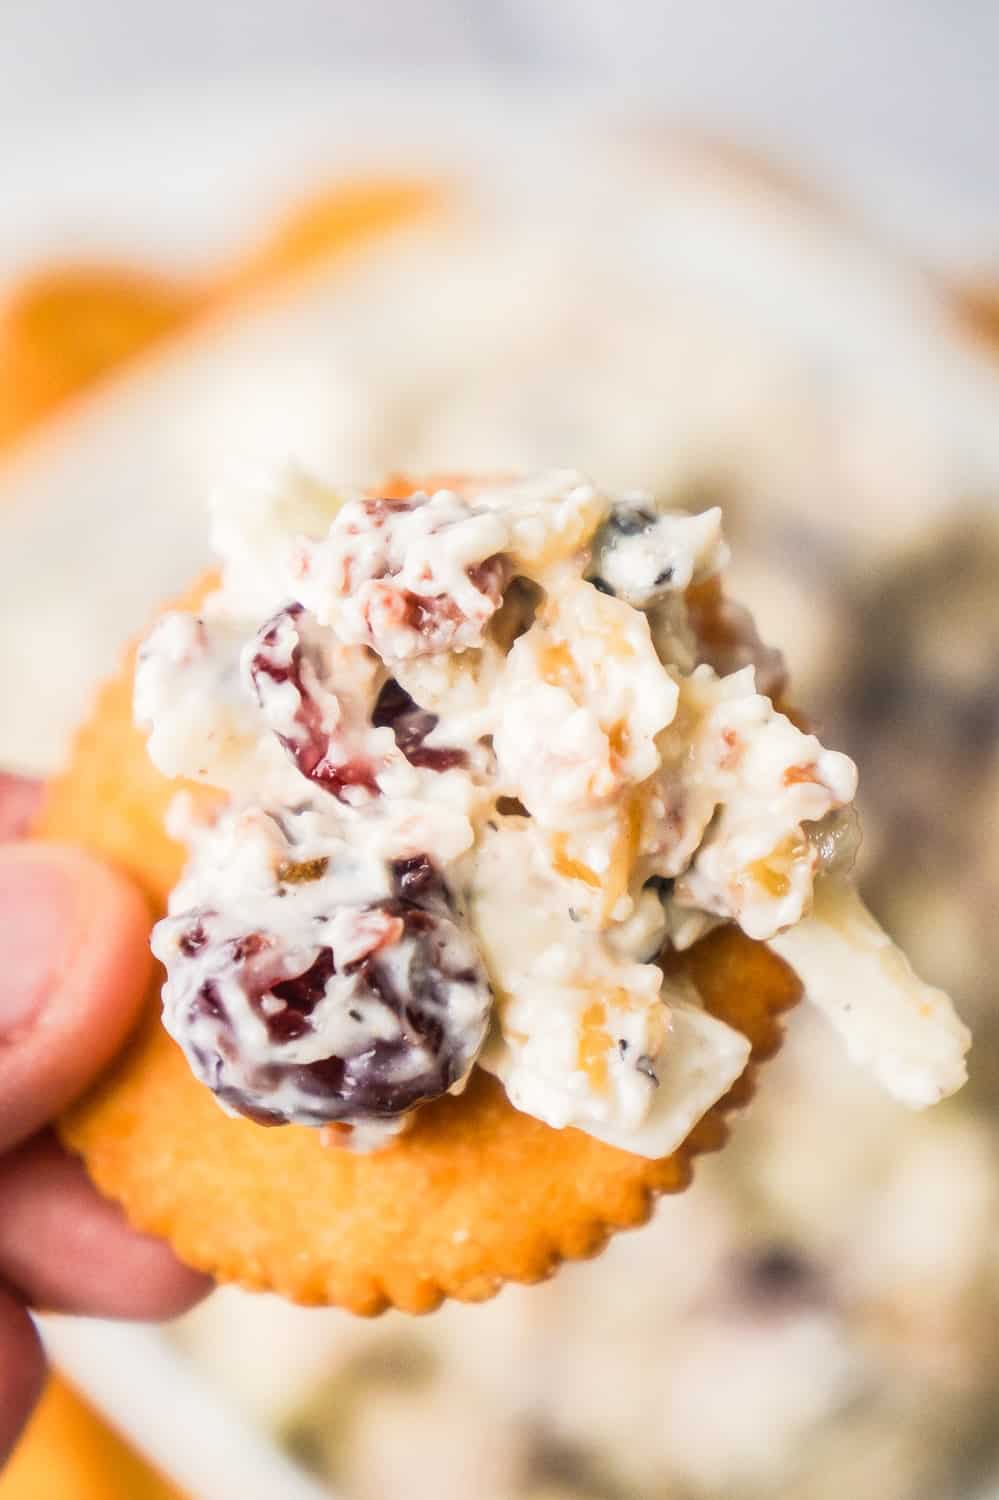 Bacon Cranberry Walnut Dip is an easy cold dip recipe perfect for serving with crackers. This cold party dip is loaded with bacon, Swiss cheese, dried cranberries and chopped walnuts.